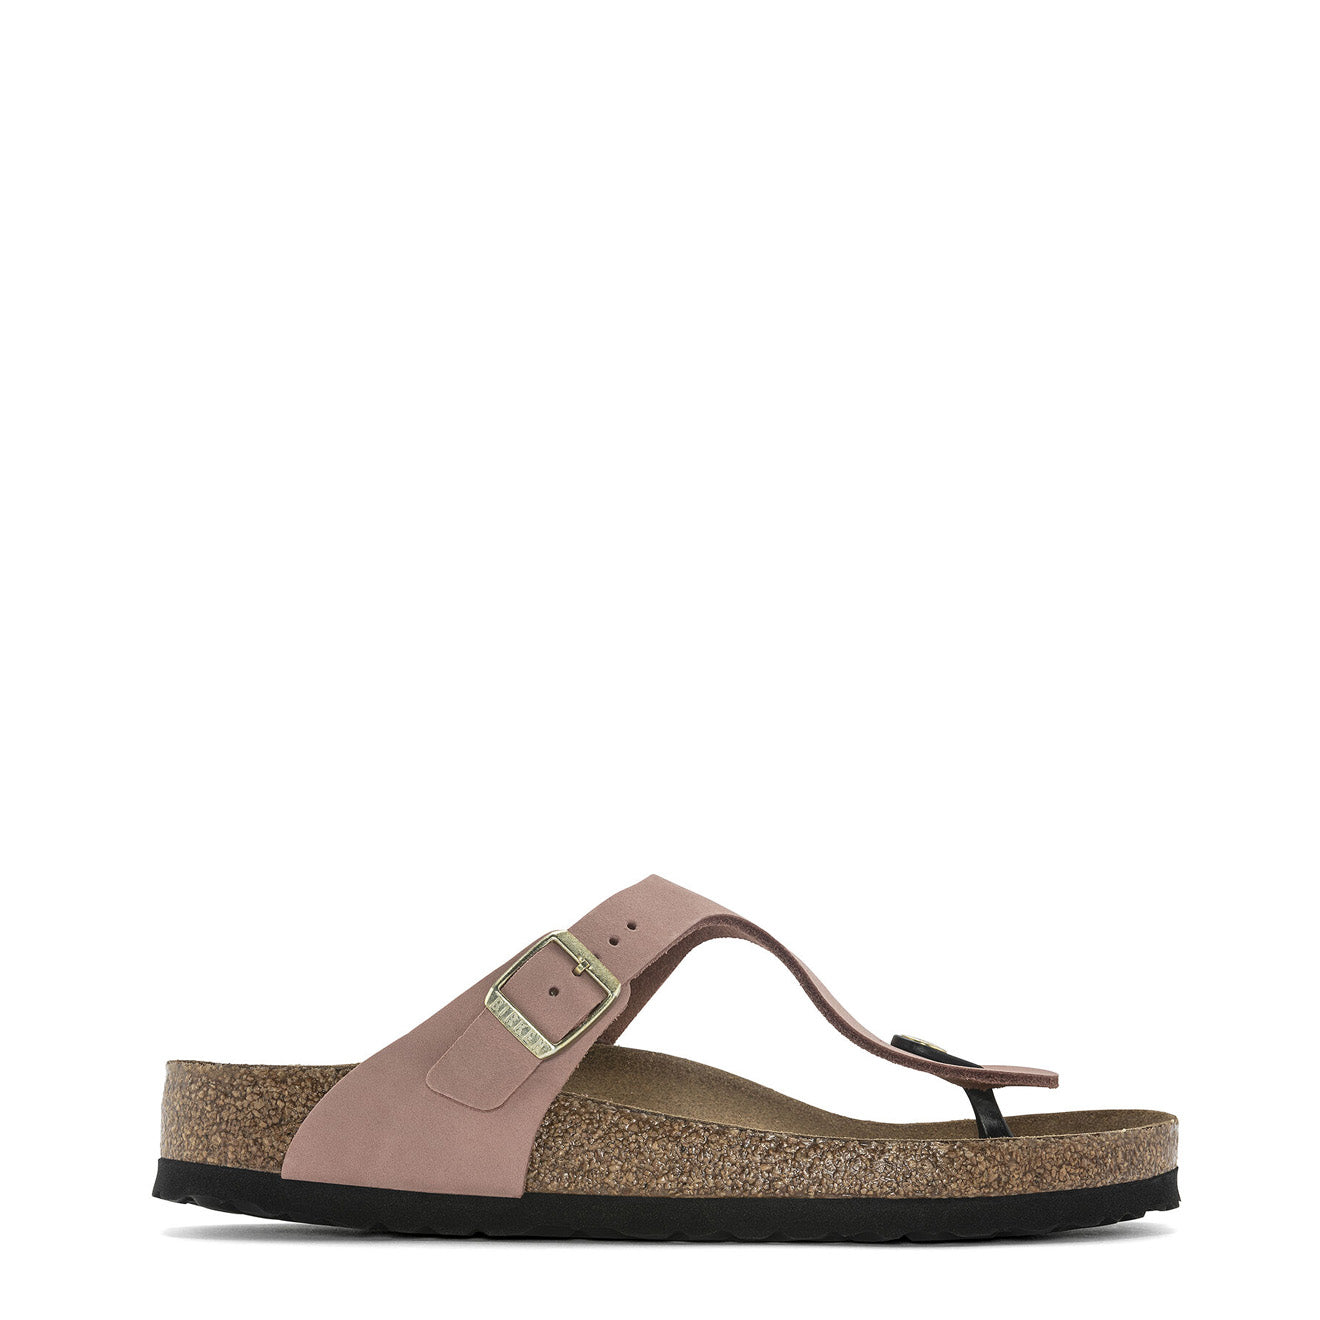 Birkenstock Womens Gizeh SFB Narrow Sandal Old Rose | The Sporting Lodge